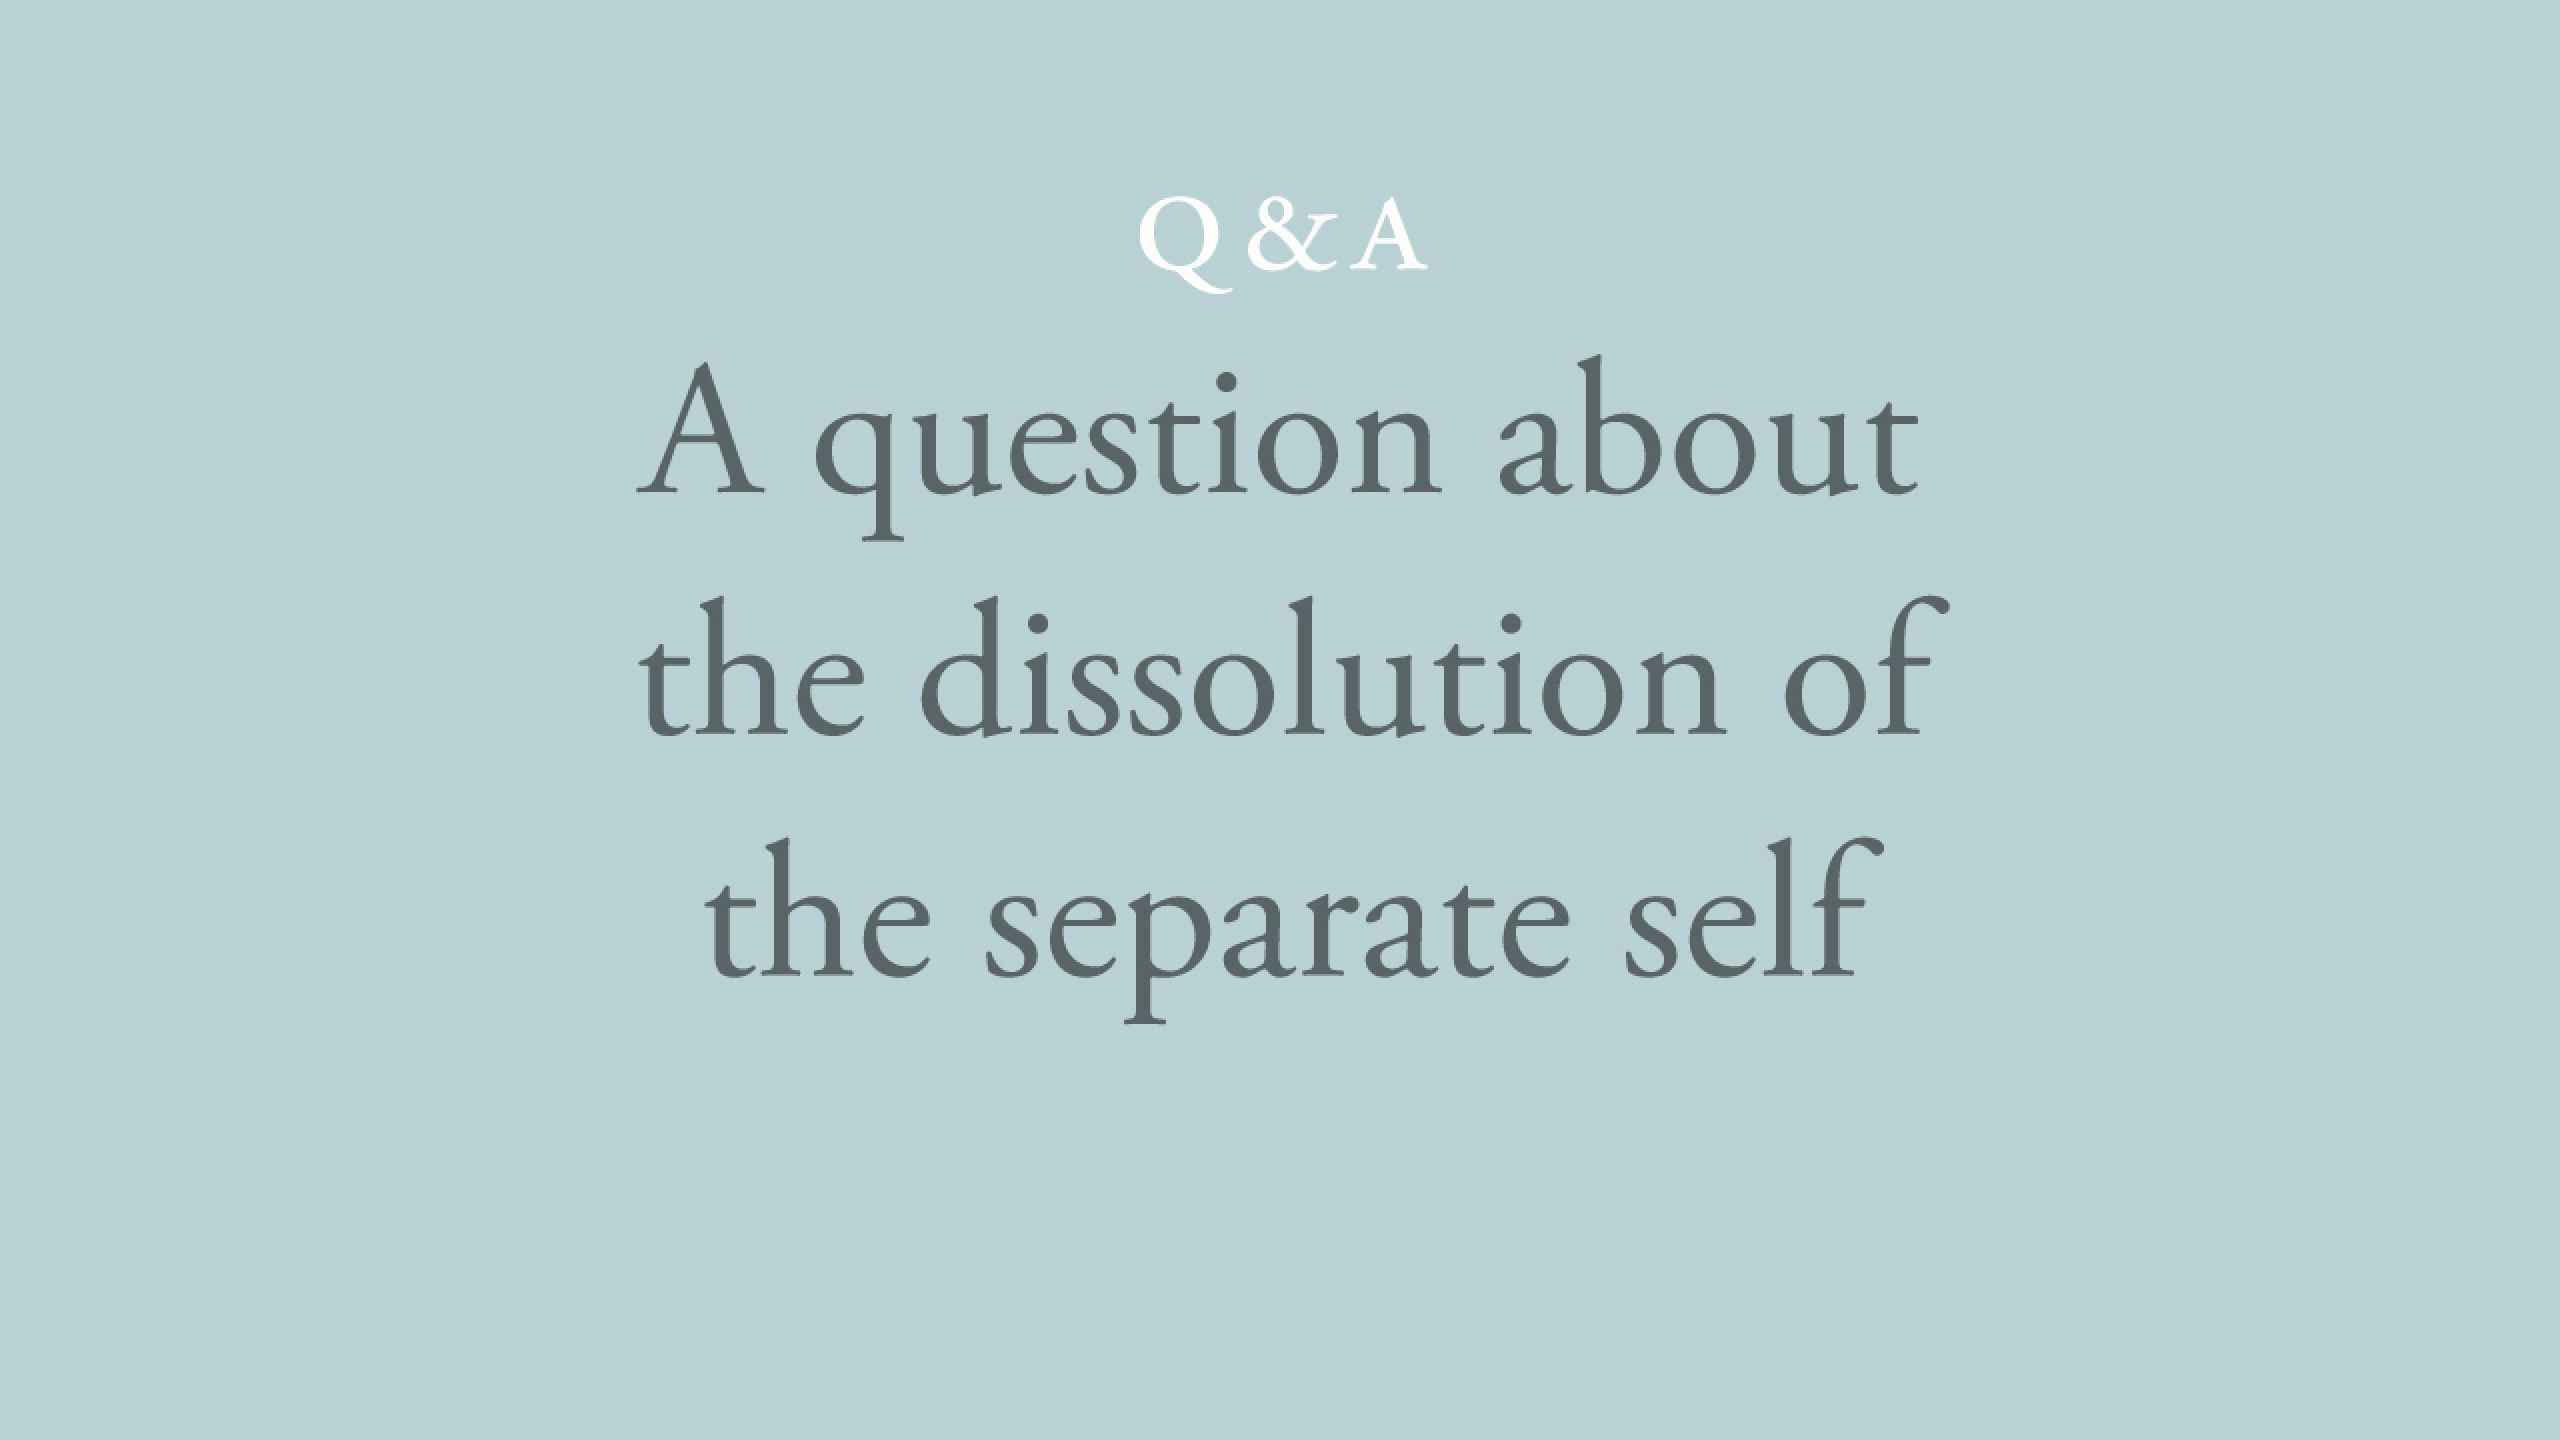 Is the complete dissolution of the separate self just another thought?